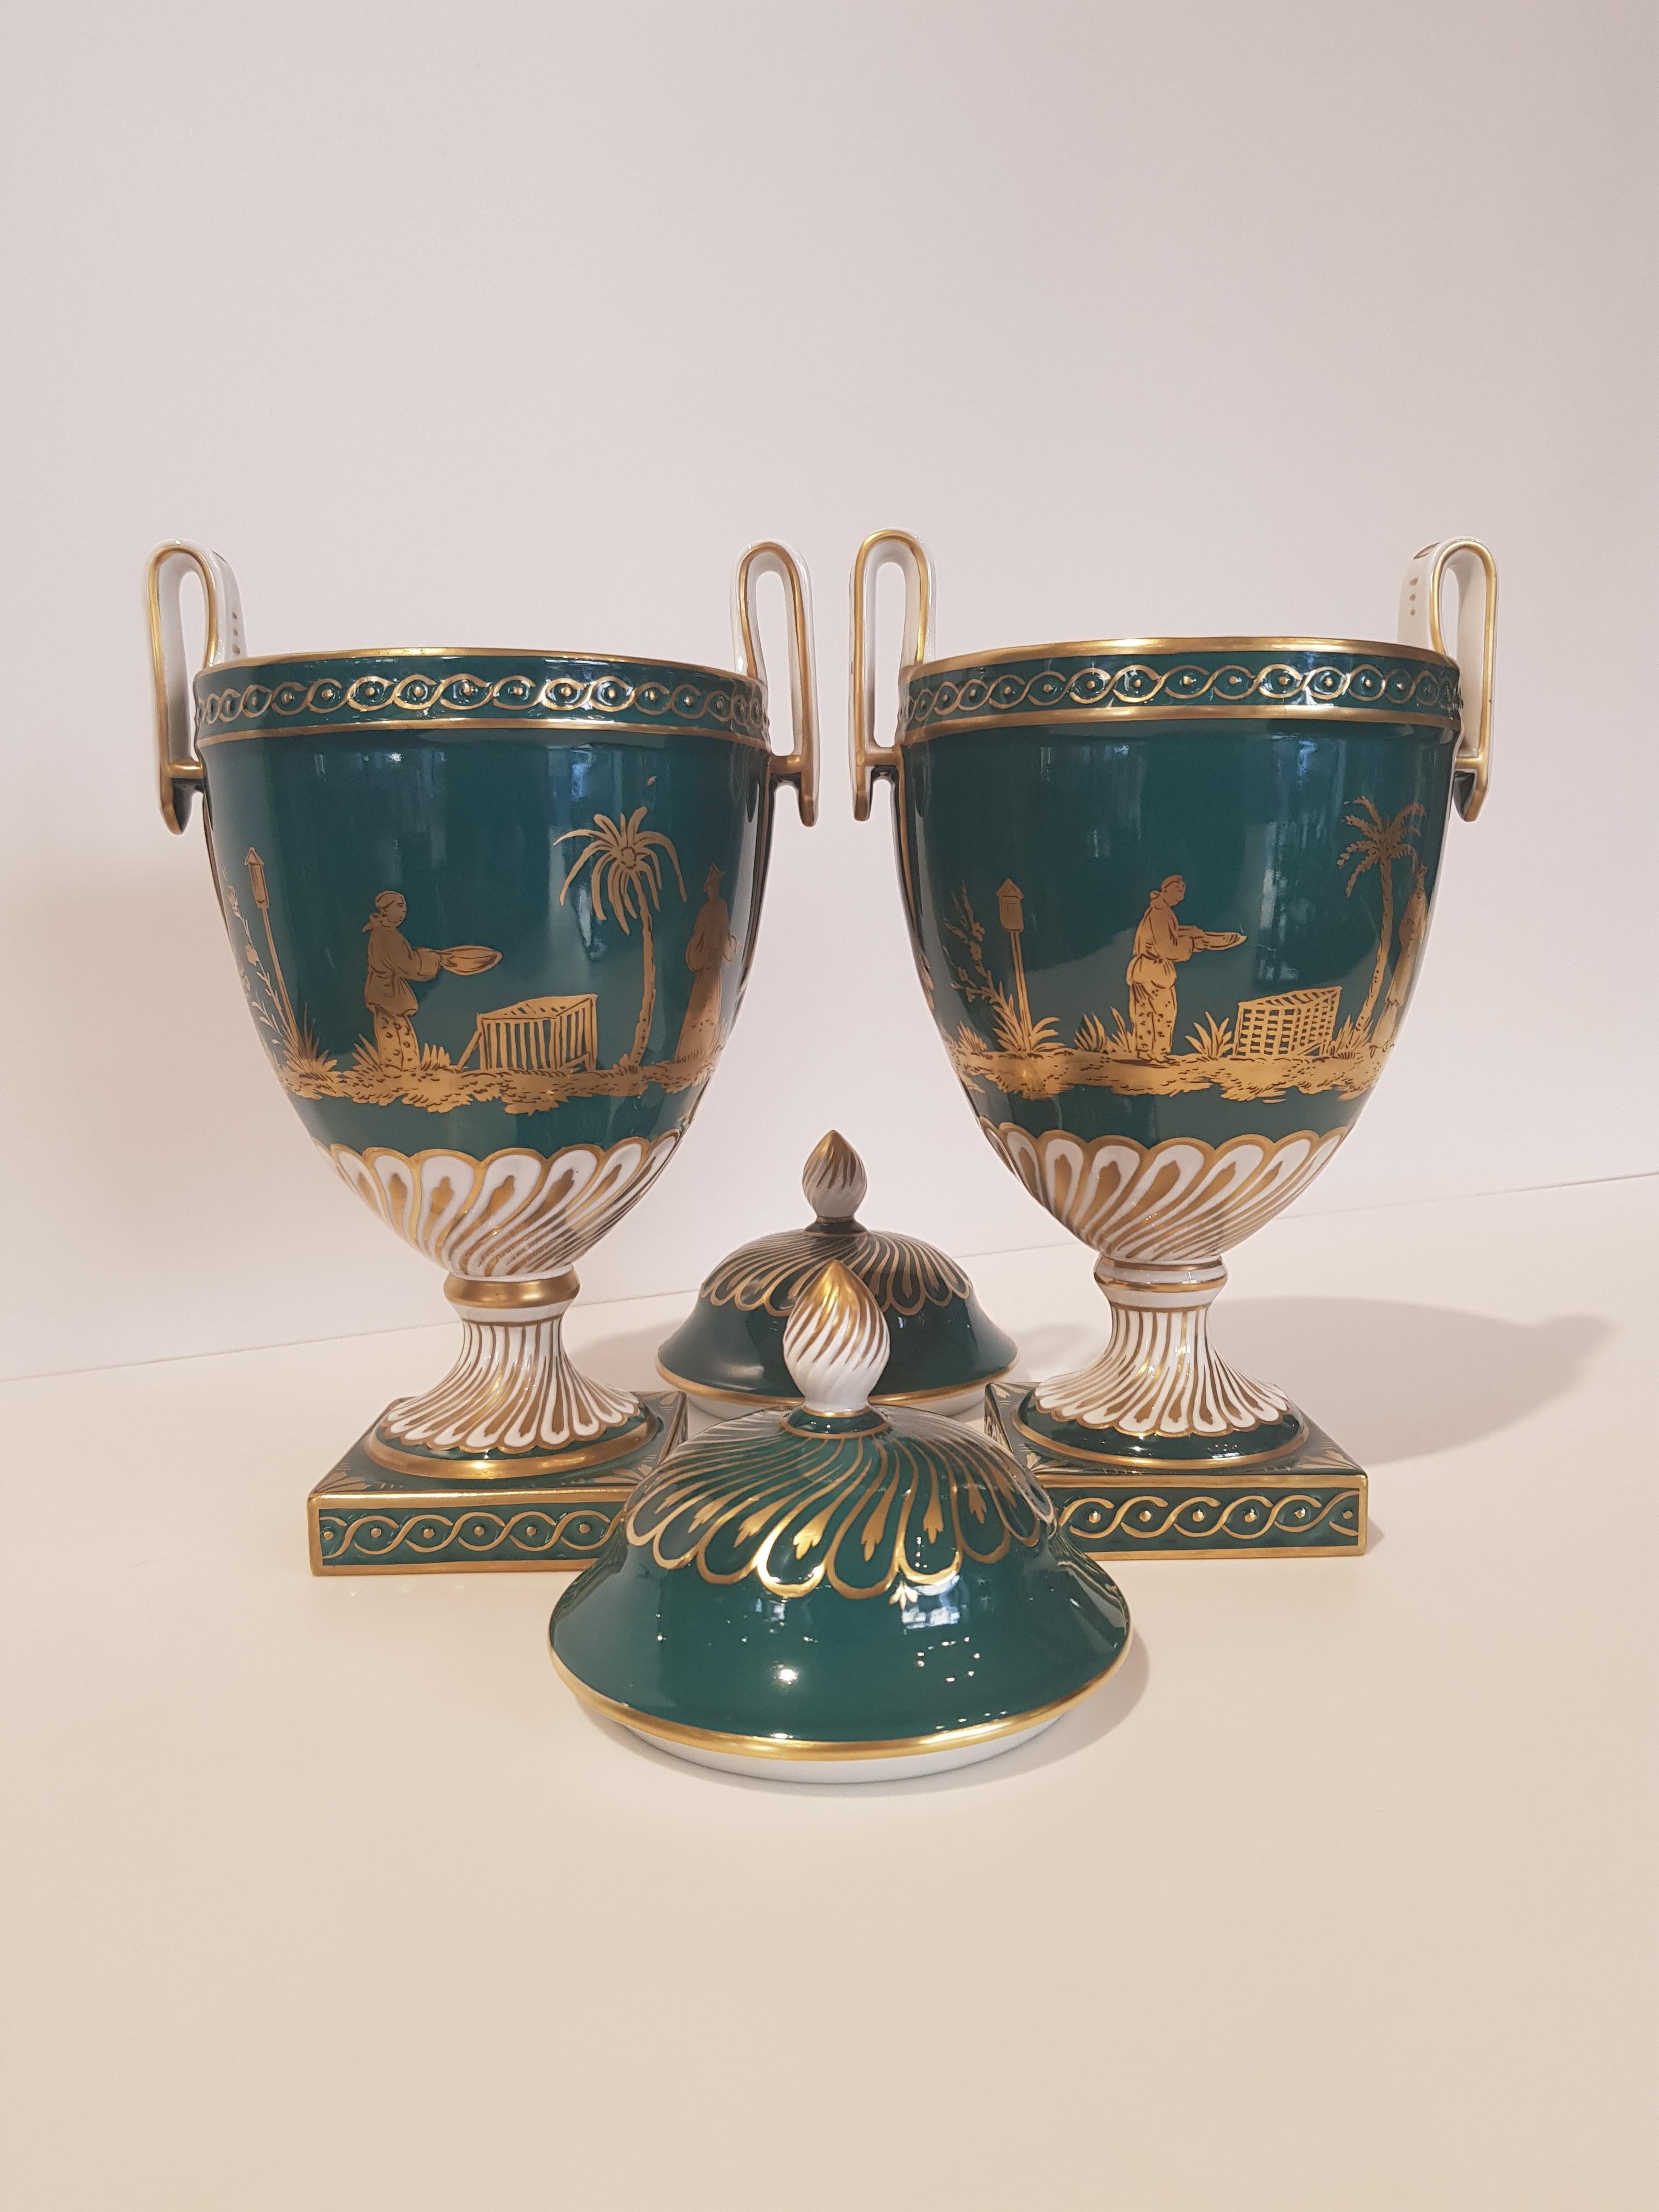 Pair of white German ceramic vases from Dresden, made and decorated by hand.
The vases are characterized by an intense green background with contrasting decorations of gold that represent the Nativity.
The vases have a lid with a pinecone grip and